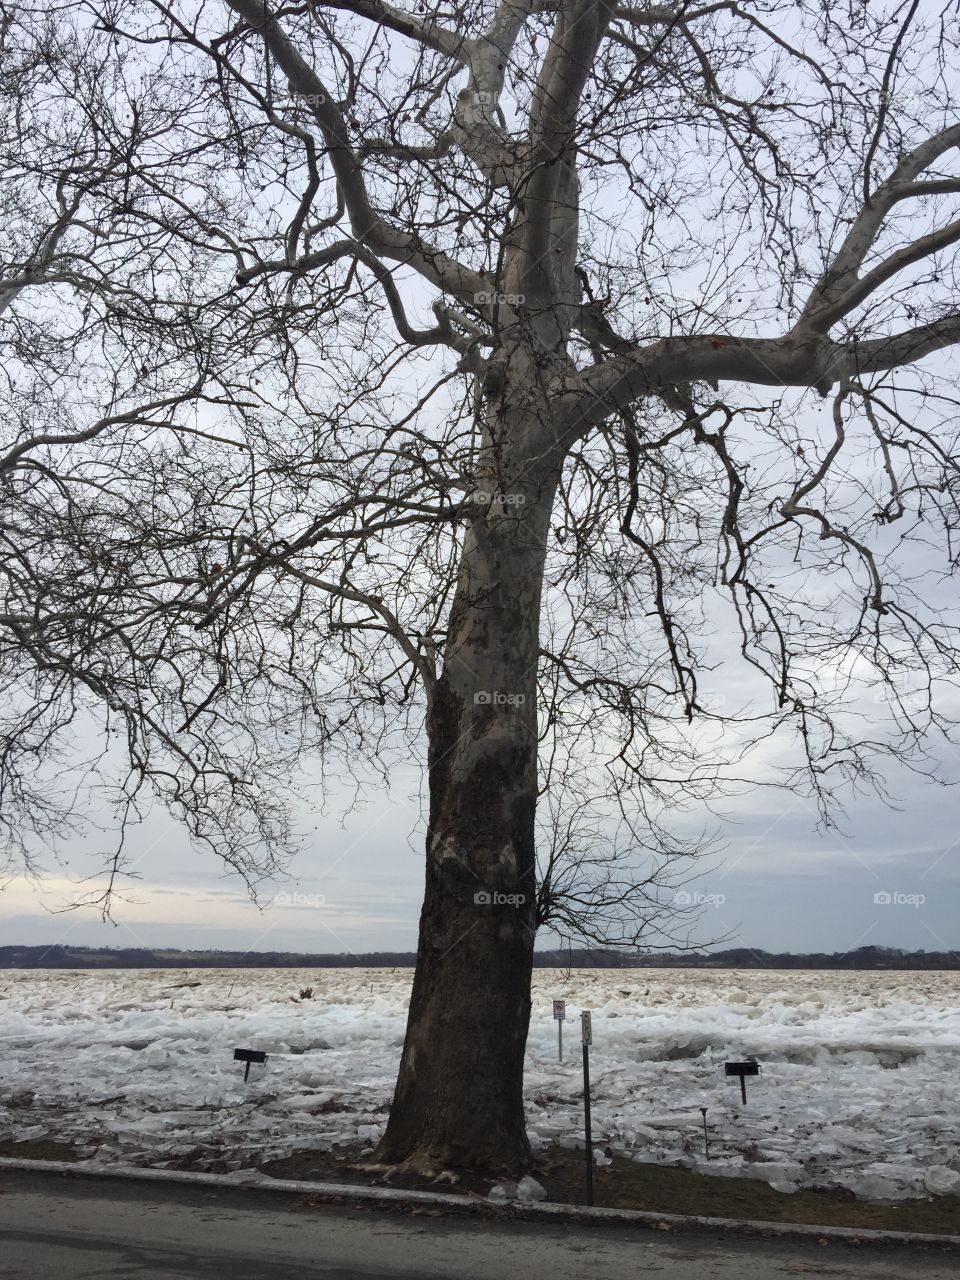 Tree of Life in the middle of an ice jam on the Susquehanna River 